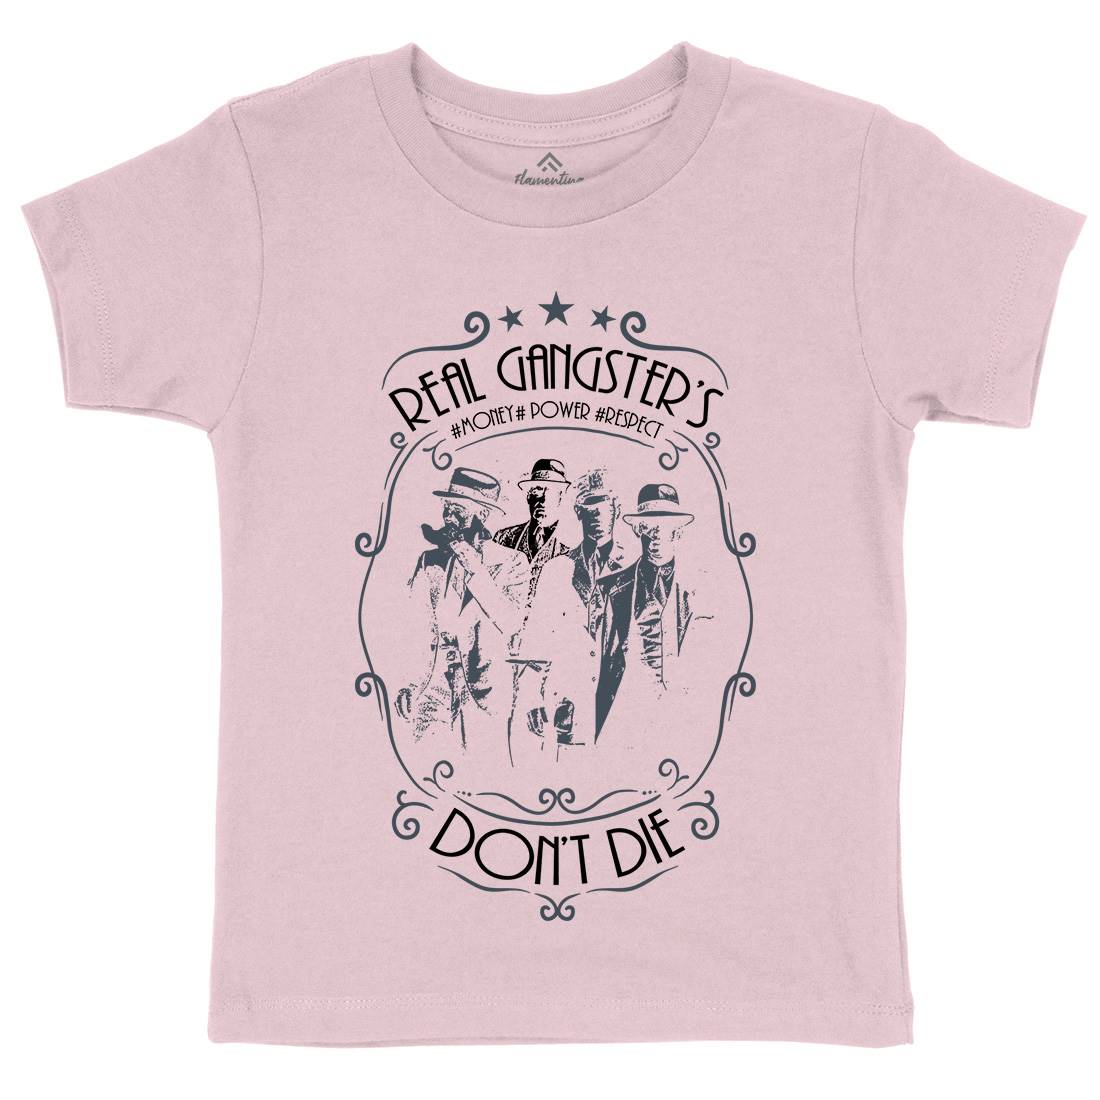 Real Gangster&#39;s Don&#39;t Die Kids Crew Neck T-Shirt Retro C972